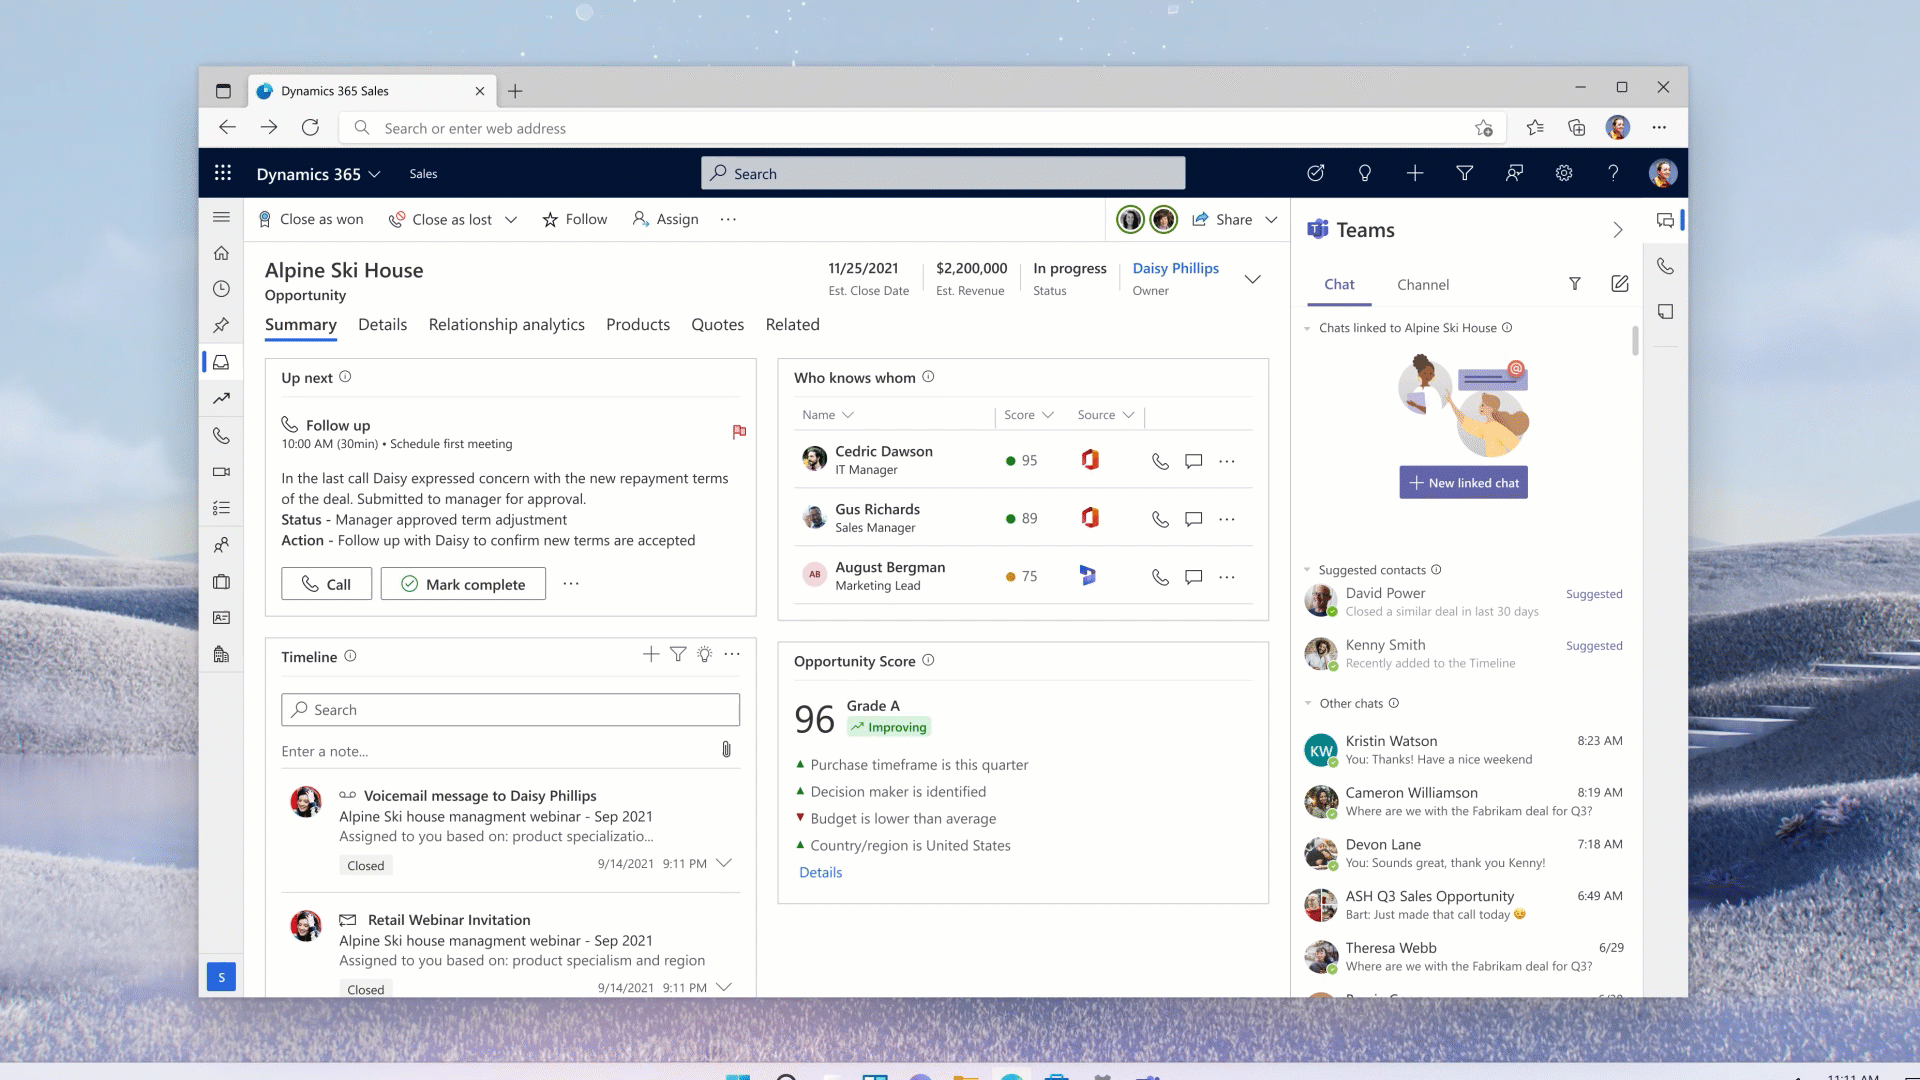 Animated image of Dynamics 365 Sales demonstrating how a user can initiate a Teams group chat from within Dynamics 365 Sales